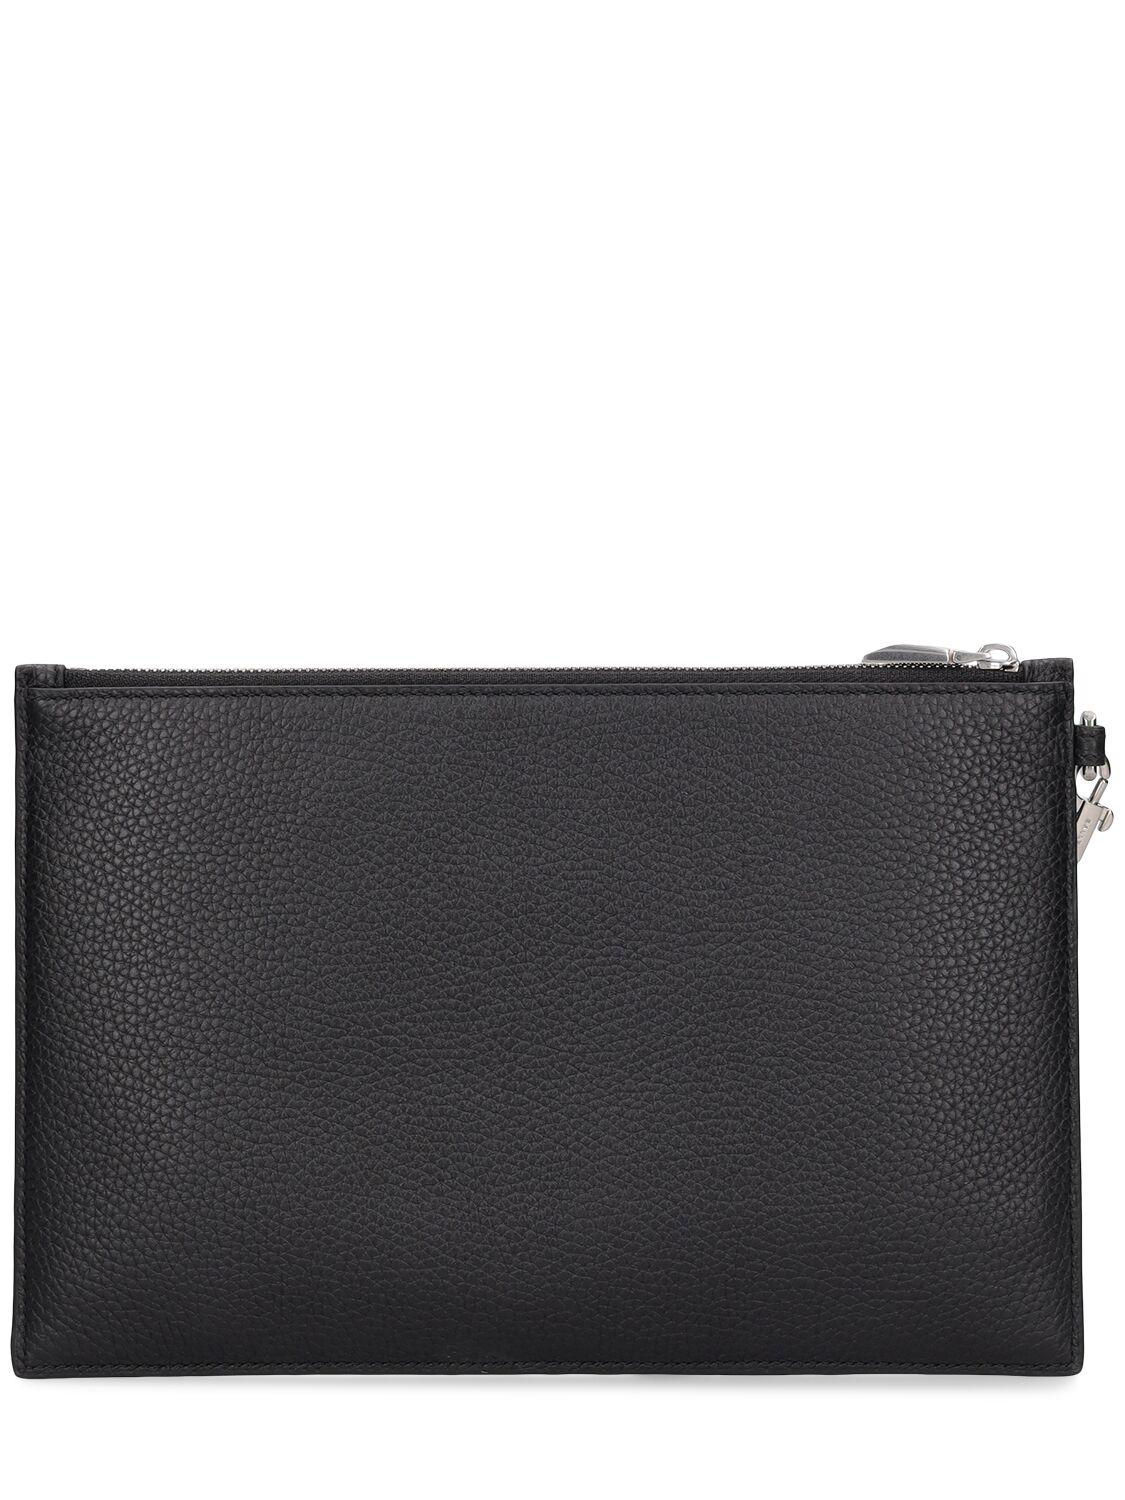 Shop Bally Ribbon Leather Zip Pouch In Black,red